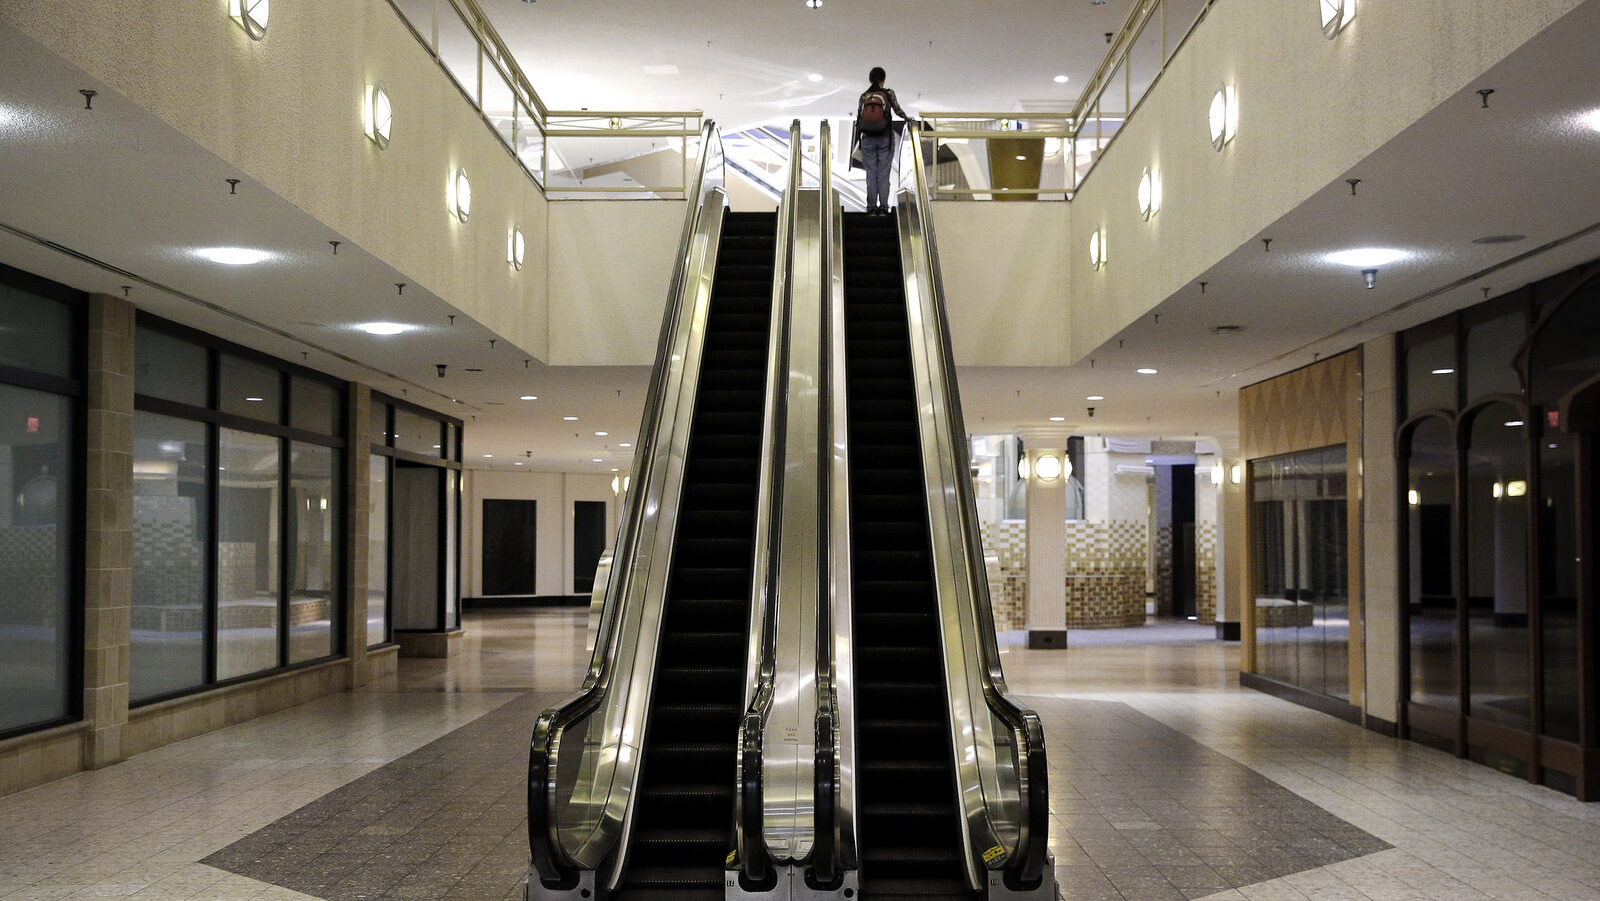 A woman rides an escalator past closed storefronts inside the largely empty White Flint Mall in Bethesda, Md. Opened in 1977, just two tenants remain. (AP/Patrick Semansky)